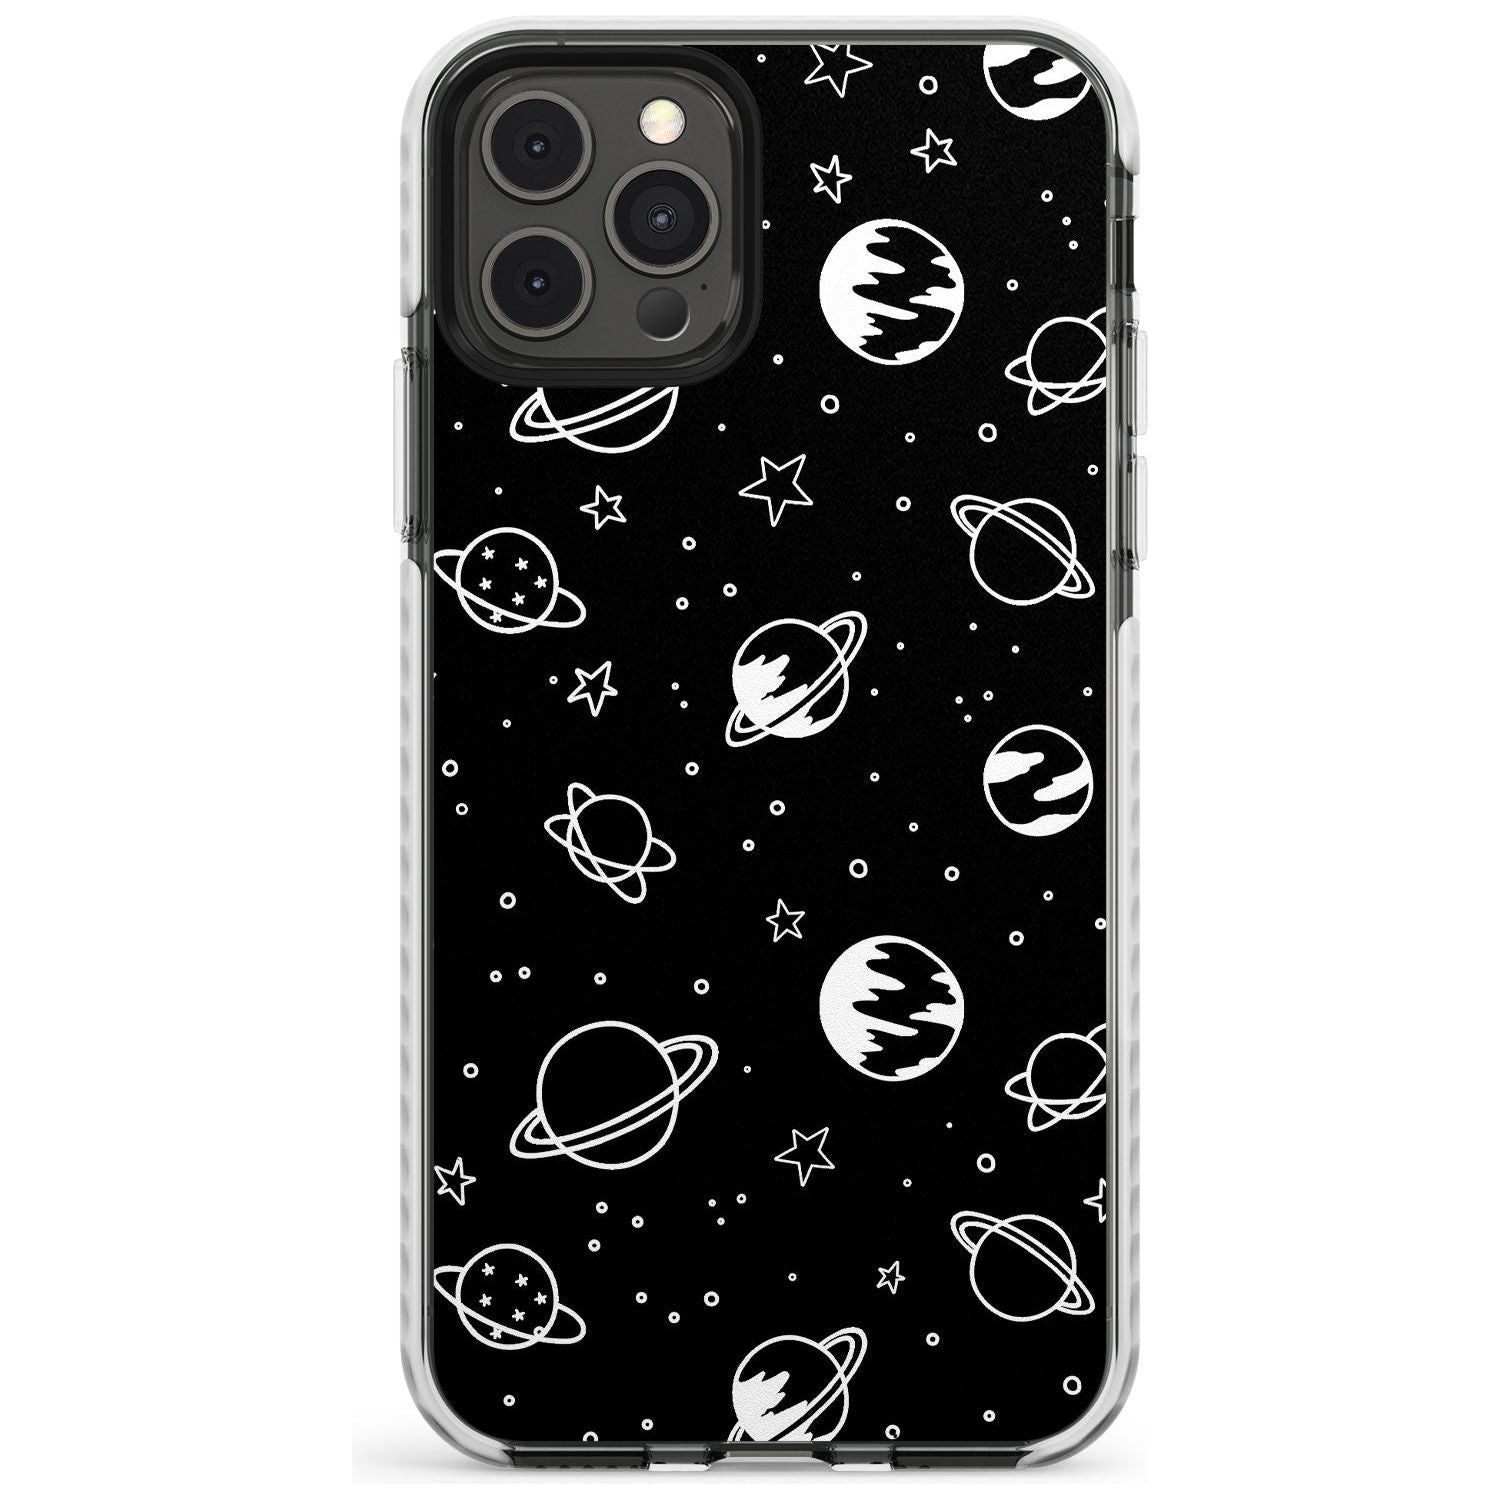 Outer Space Outlines: White on Black Slim TPU Phone Case for iPhone 11 Pro Max